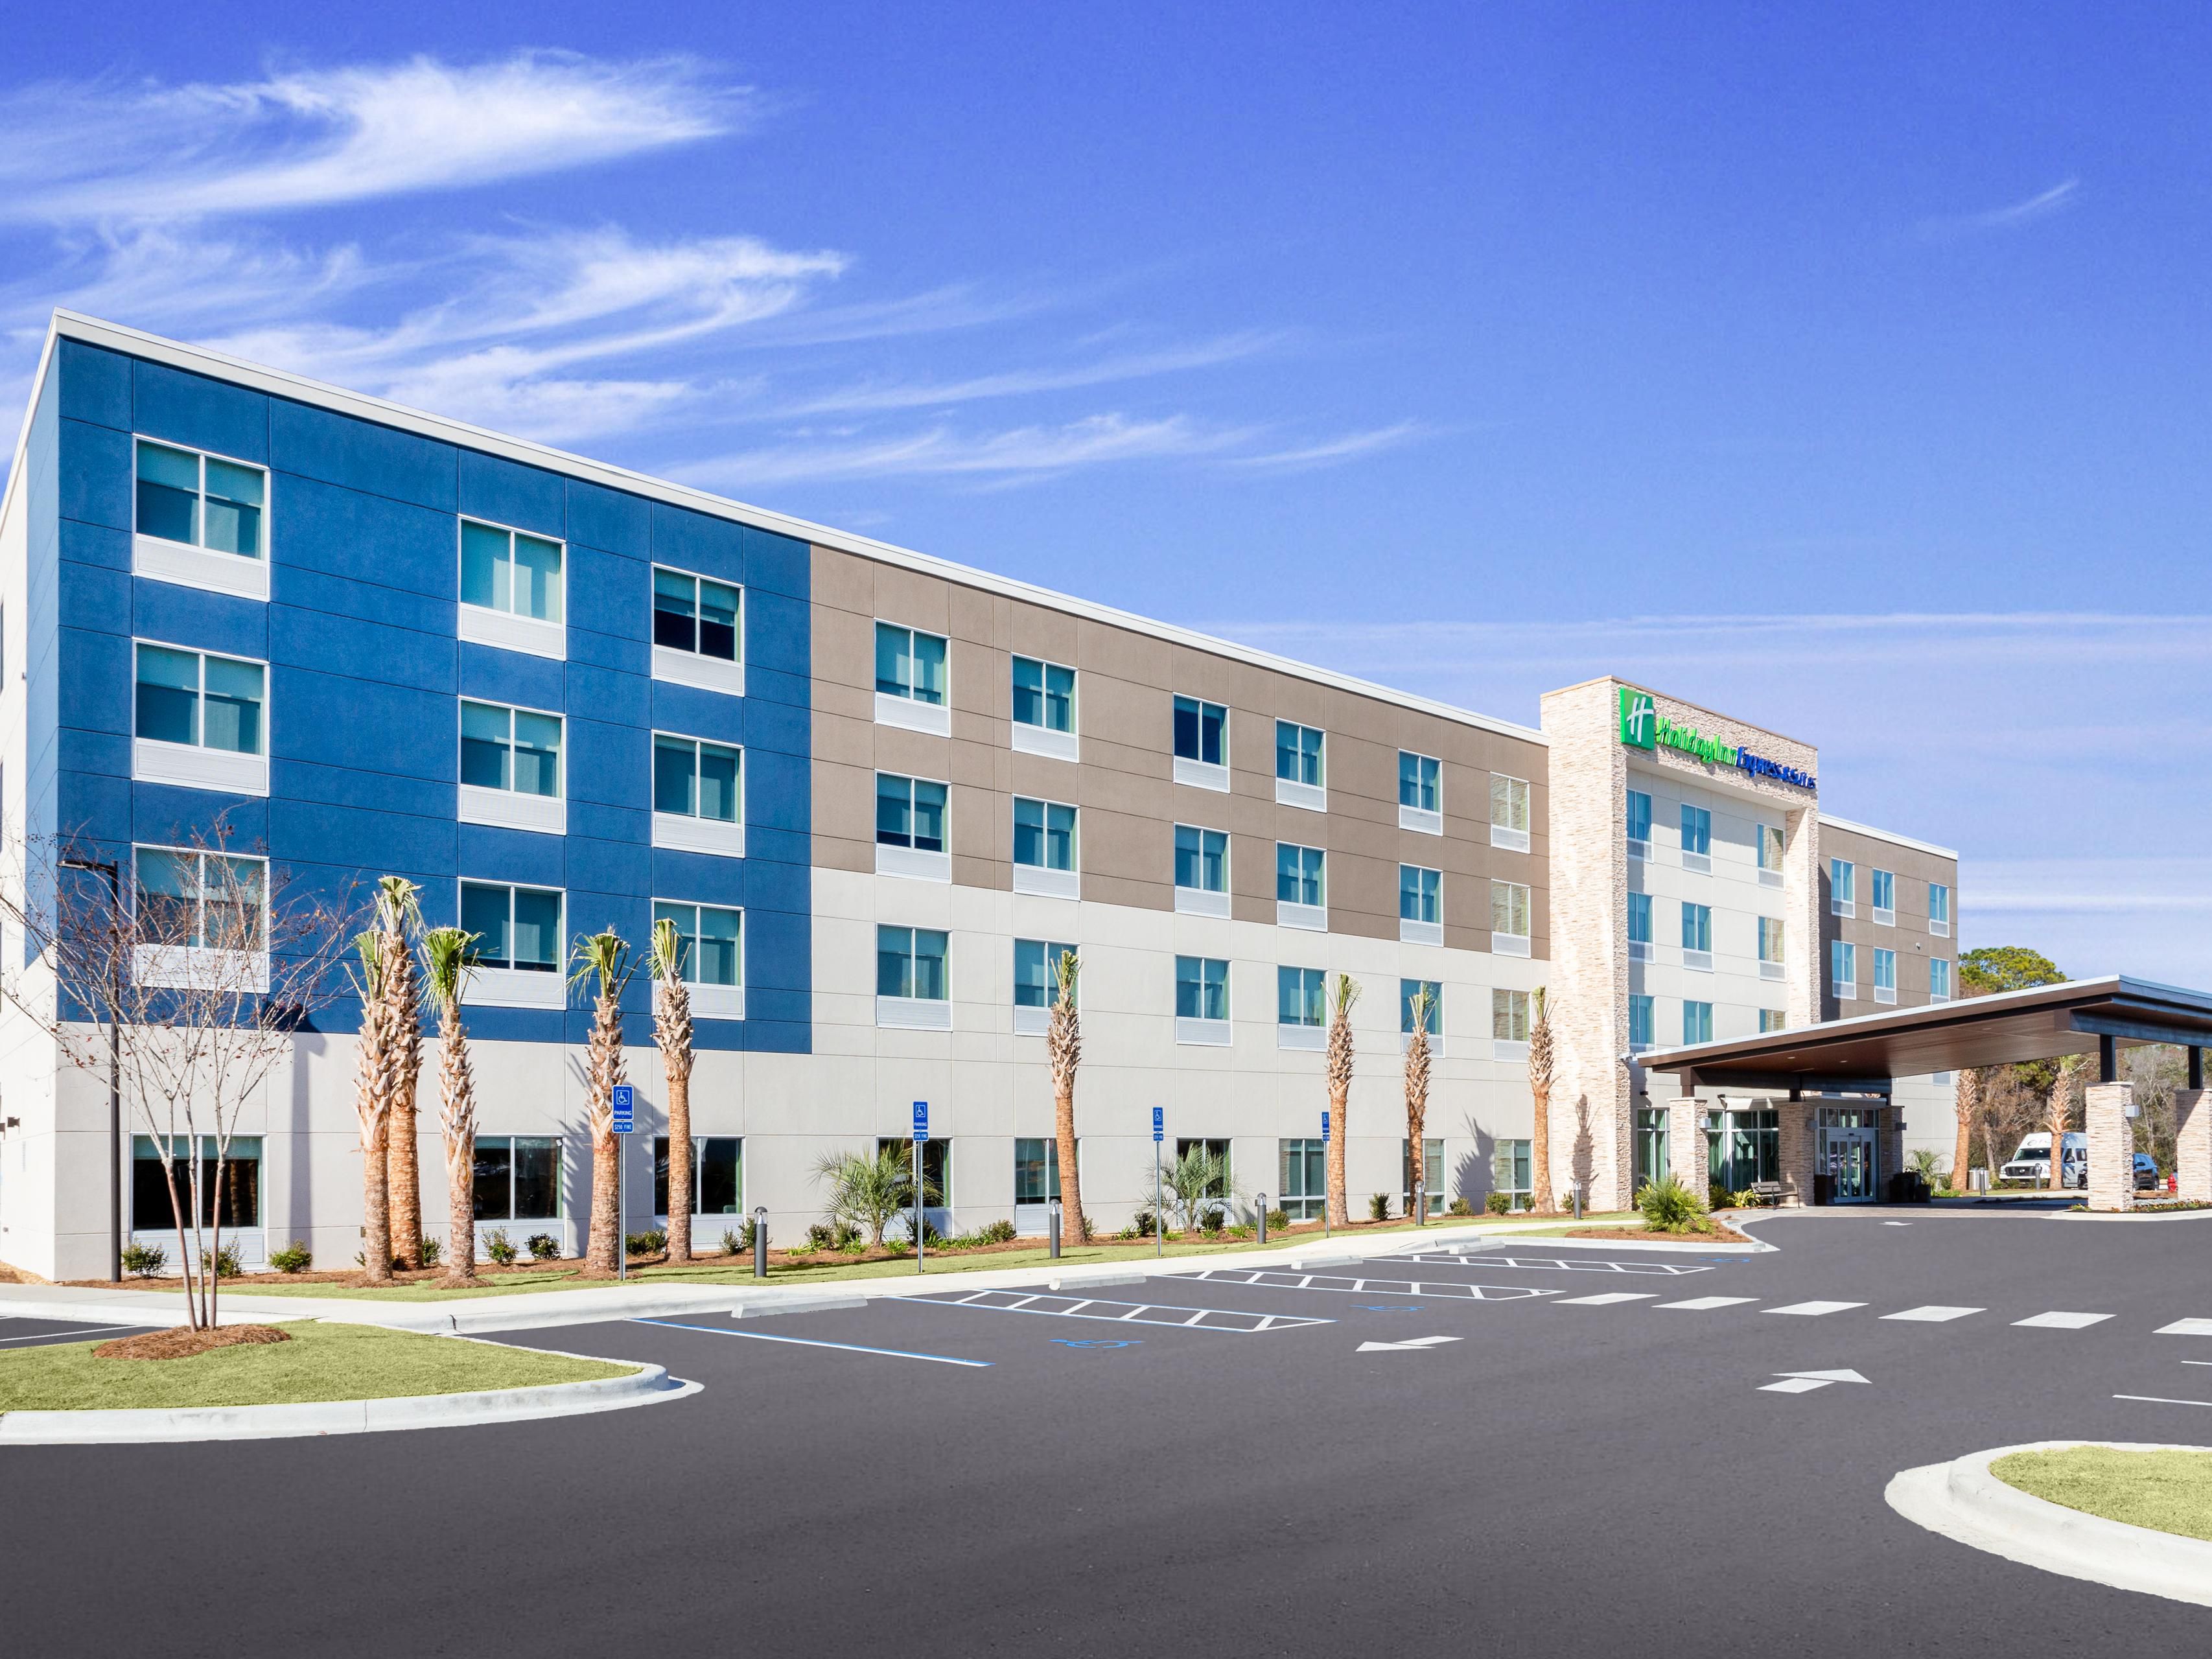 Hotels With Kitchens In Miramar Beach Fl Candlewood Suites Miramar Beach Price From Usd 331 55